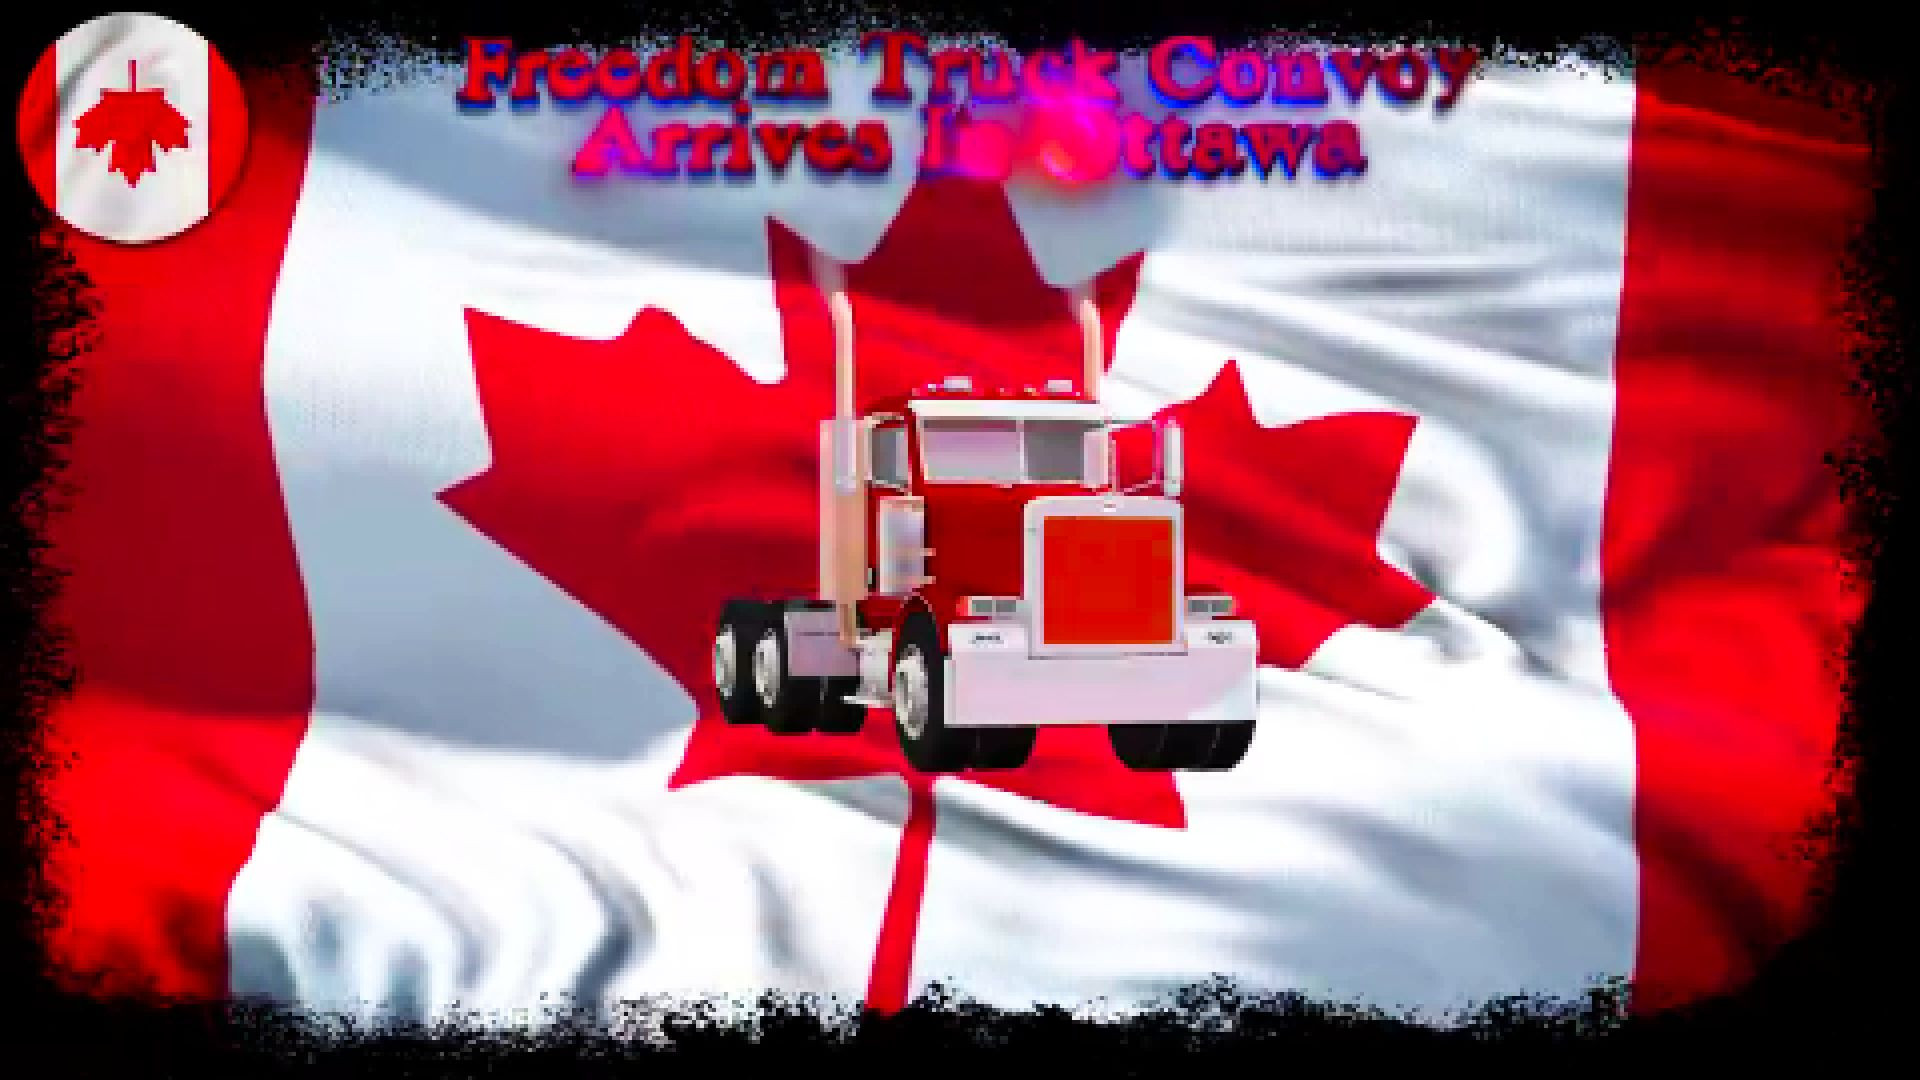 A LOOK BACK AT THE FREEDOM TRUCK CONVOY ARRIVAL IN OTTAWA - KEEP ON ROCKING IN THE FREE WORLD